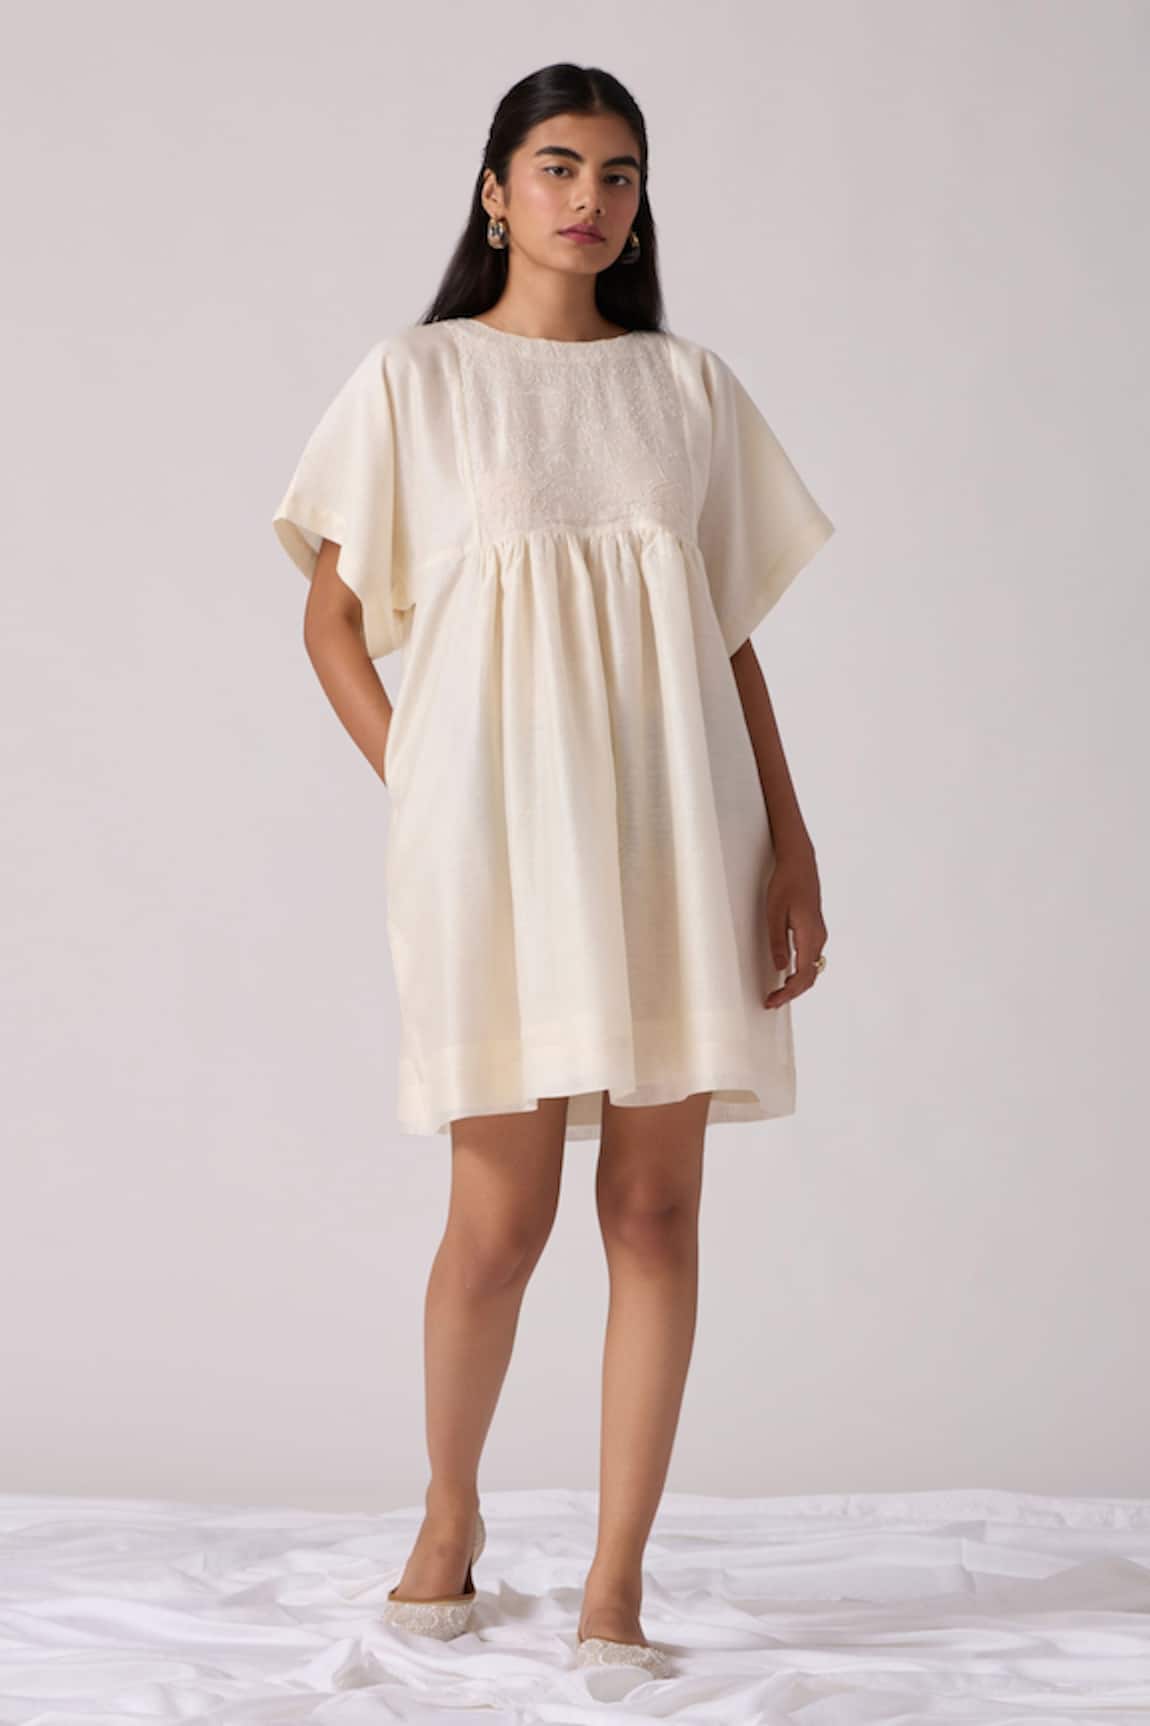 The Summer House Yara Hand Embroidered Dress